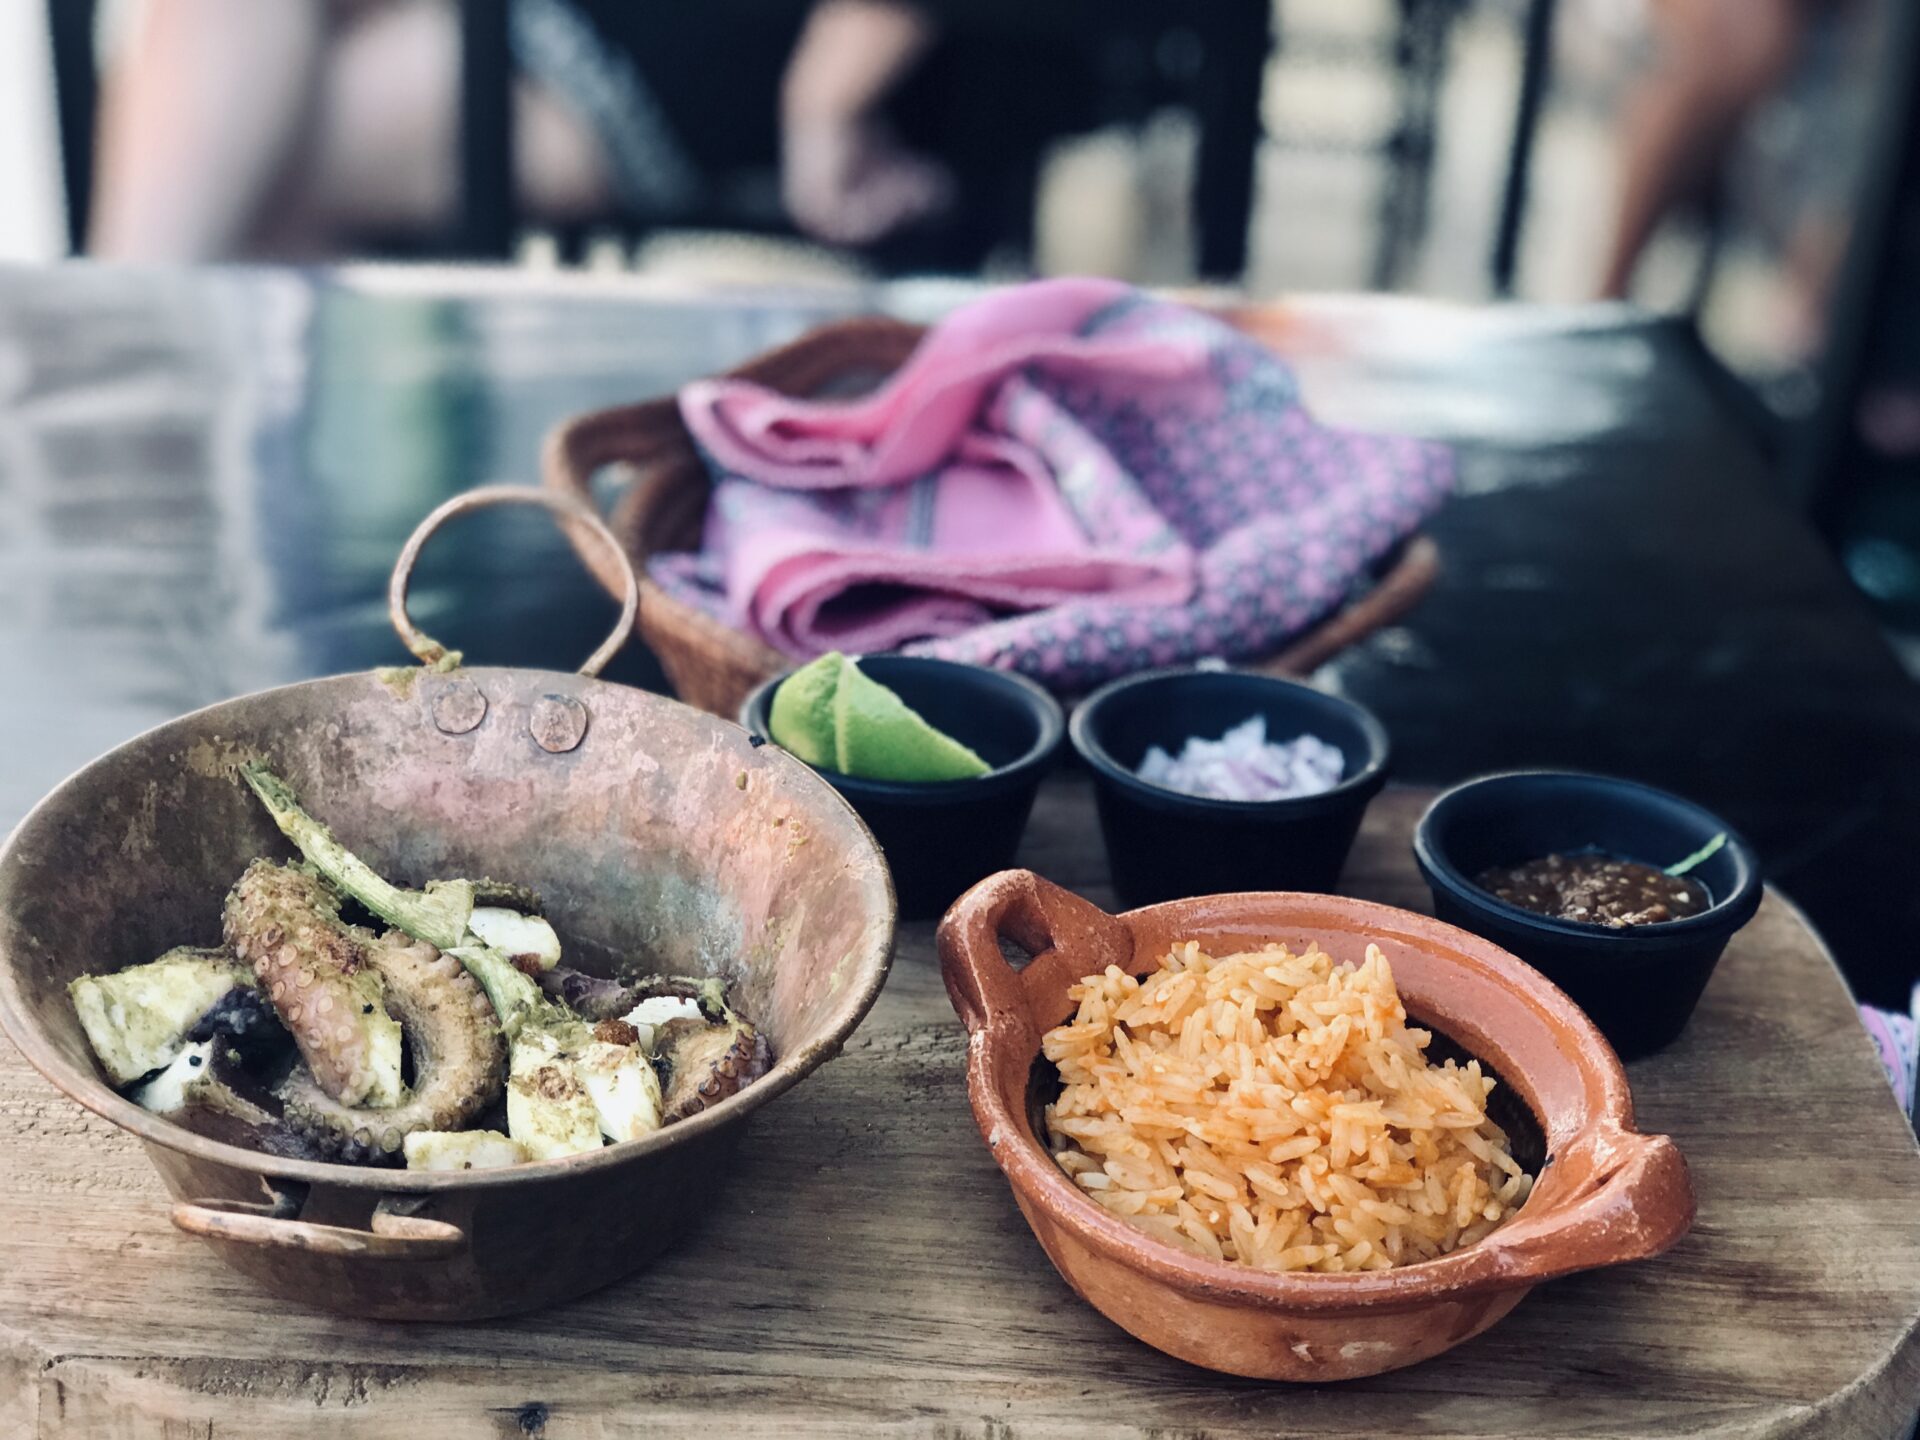 Isla Mujeres, Mexico: What To Eat And Where To Drink